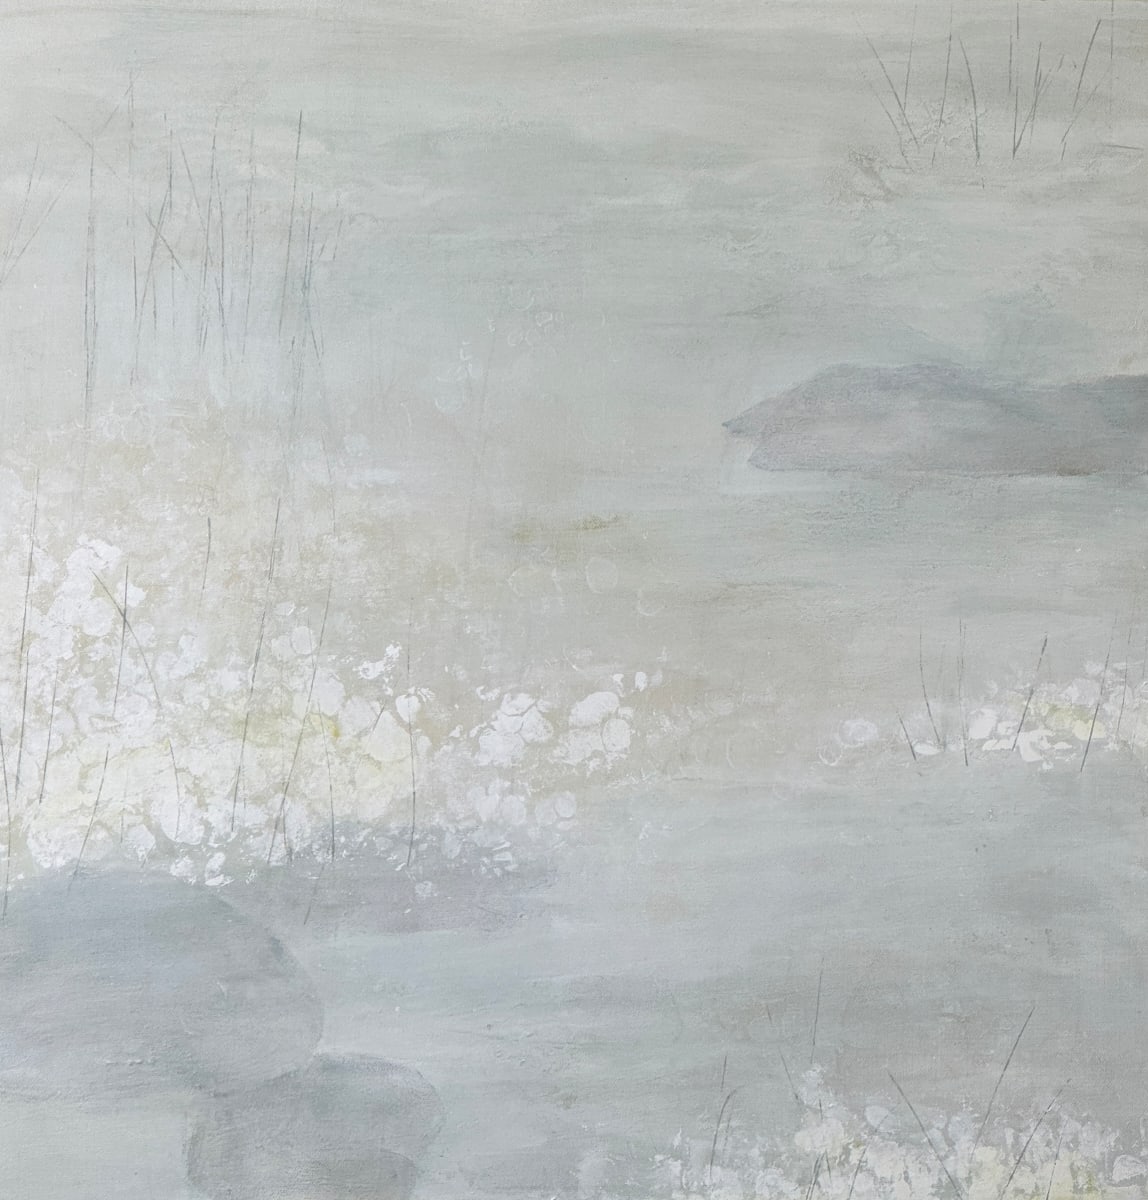 The Pond in February 4, From the Nature’s Botanics Portfolio, 2023, Acrylic on canvas, 24 x 24 inches. by Juanita 